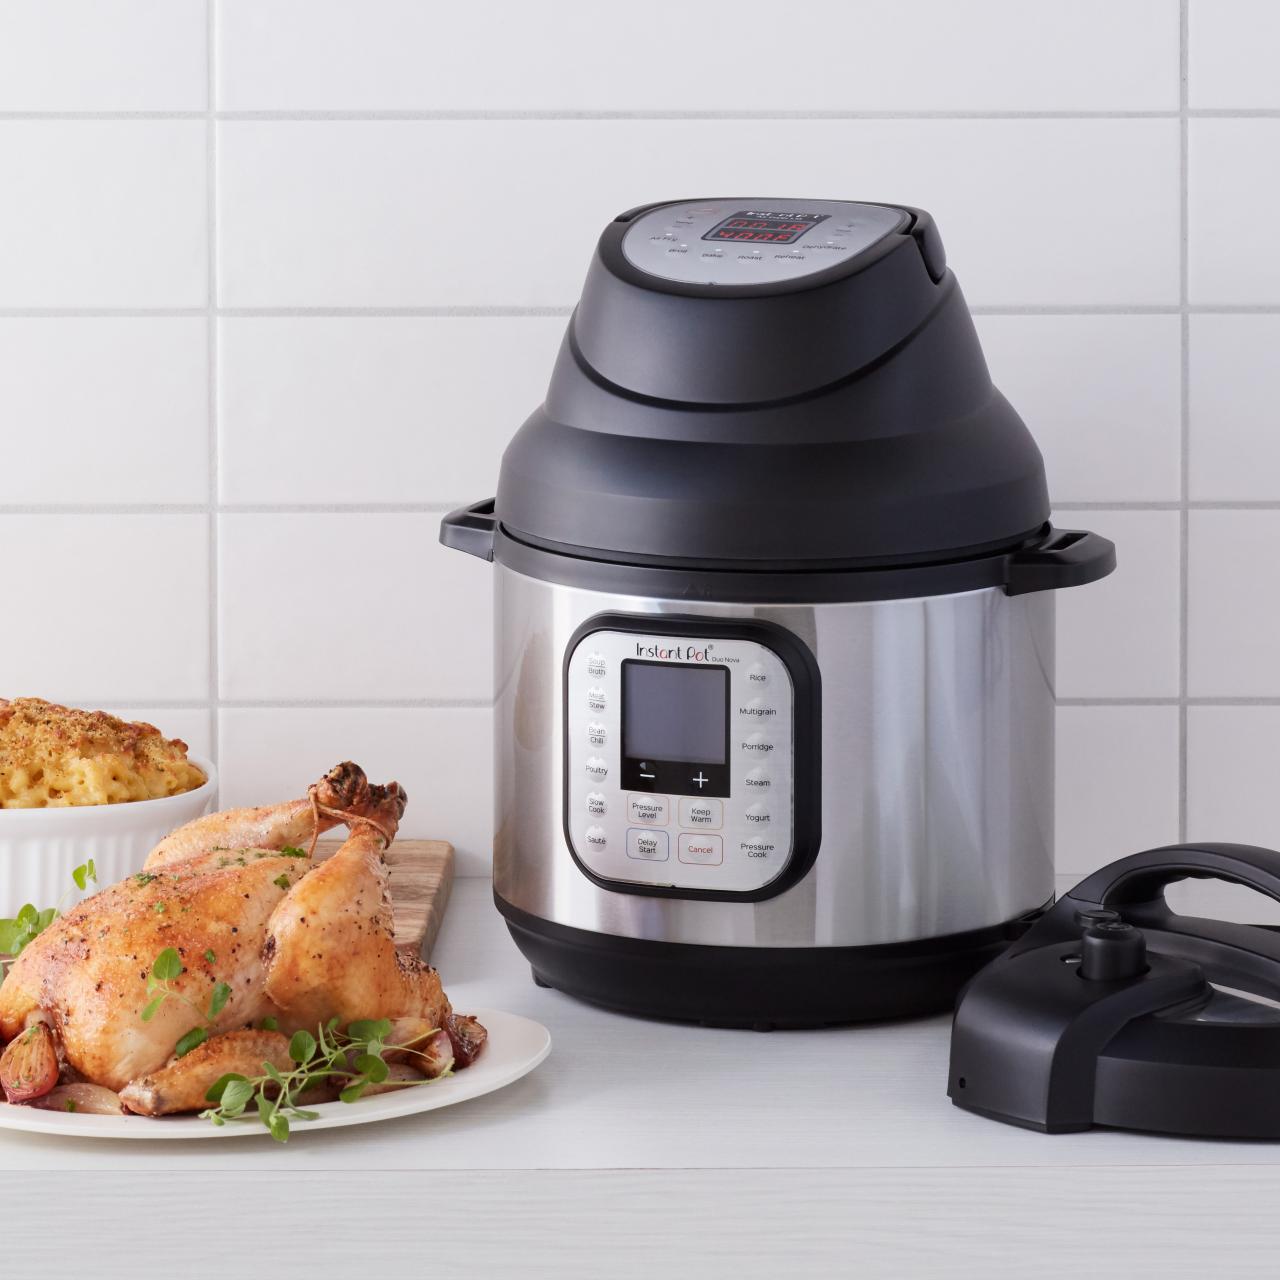 Can I use a ceramic coated inner pot when using the Air Fryer Lid